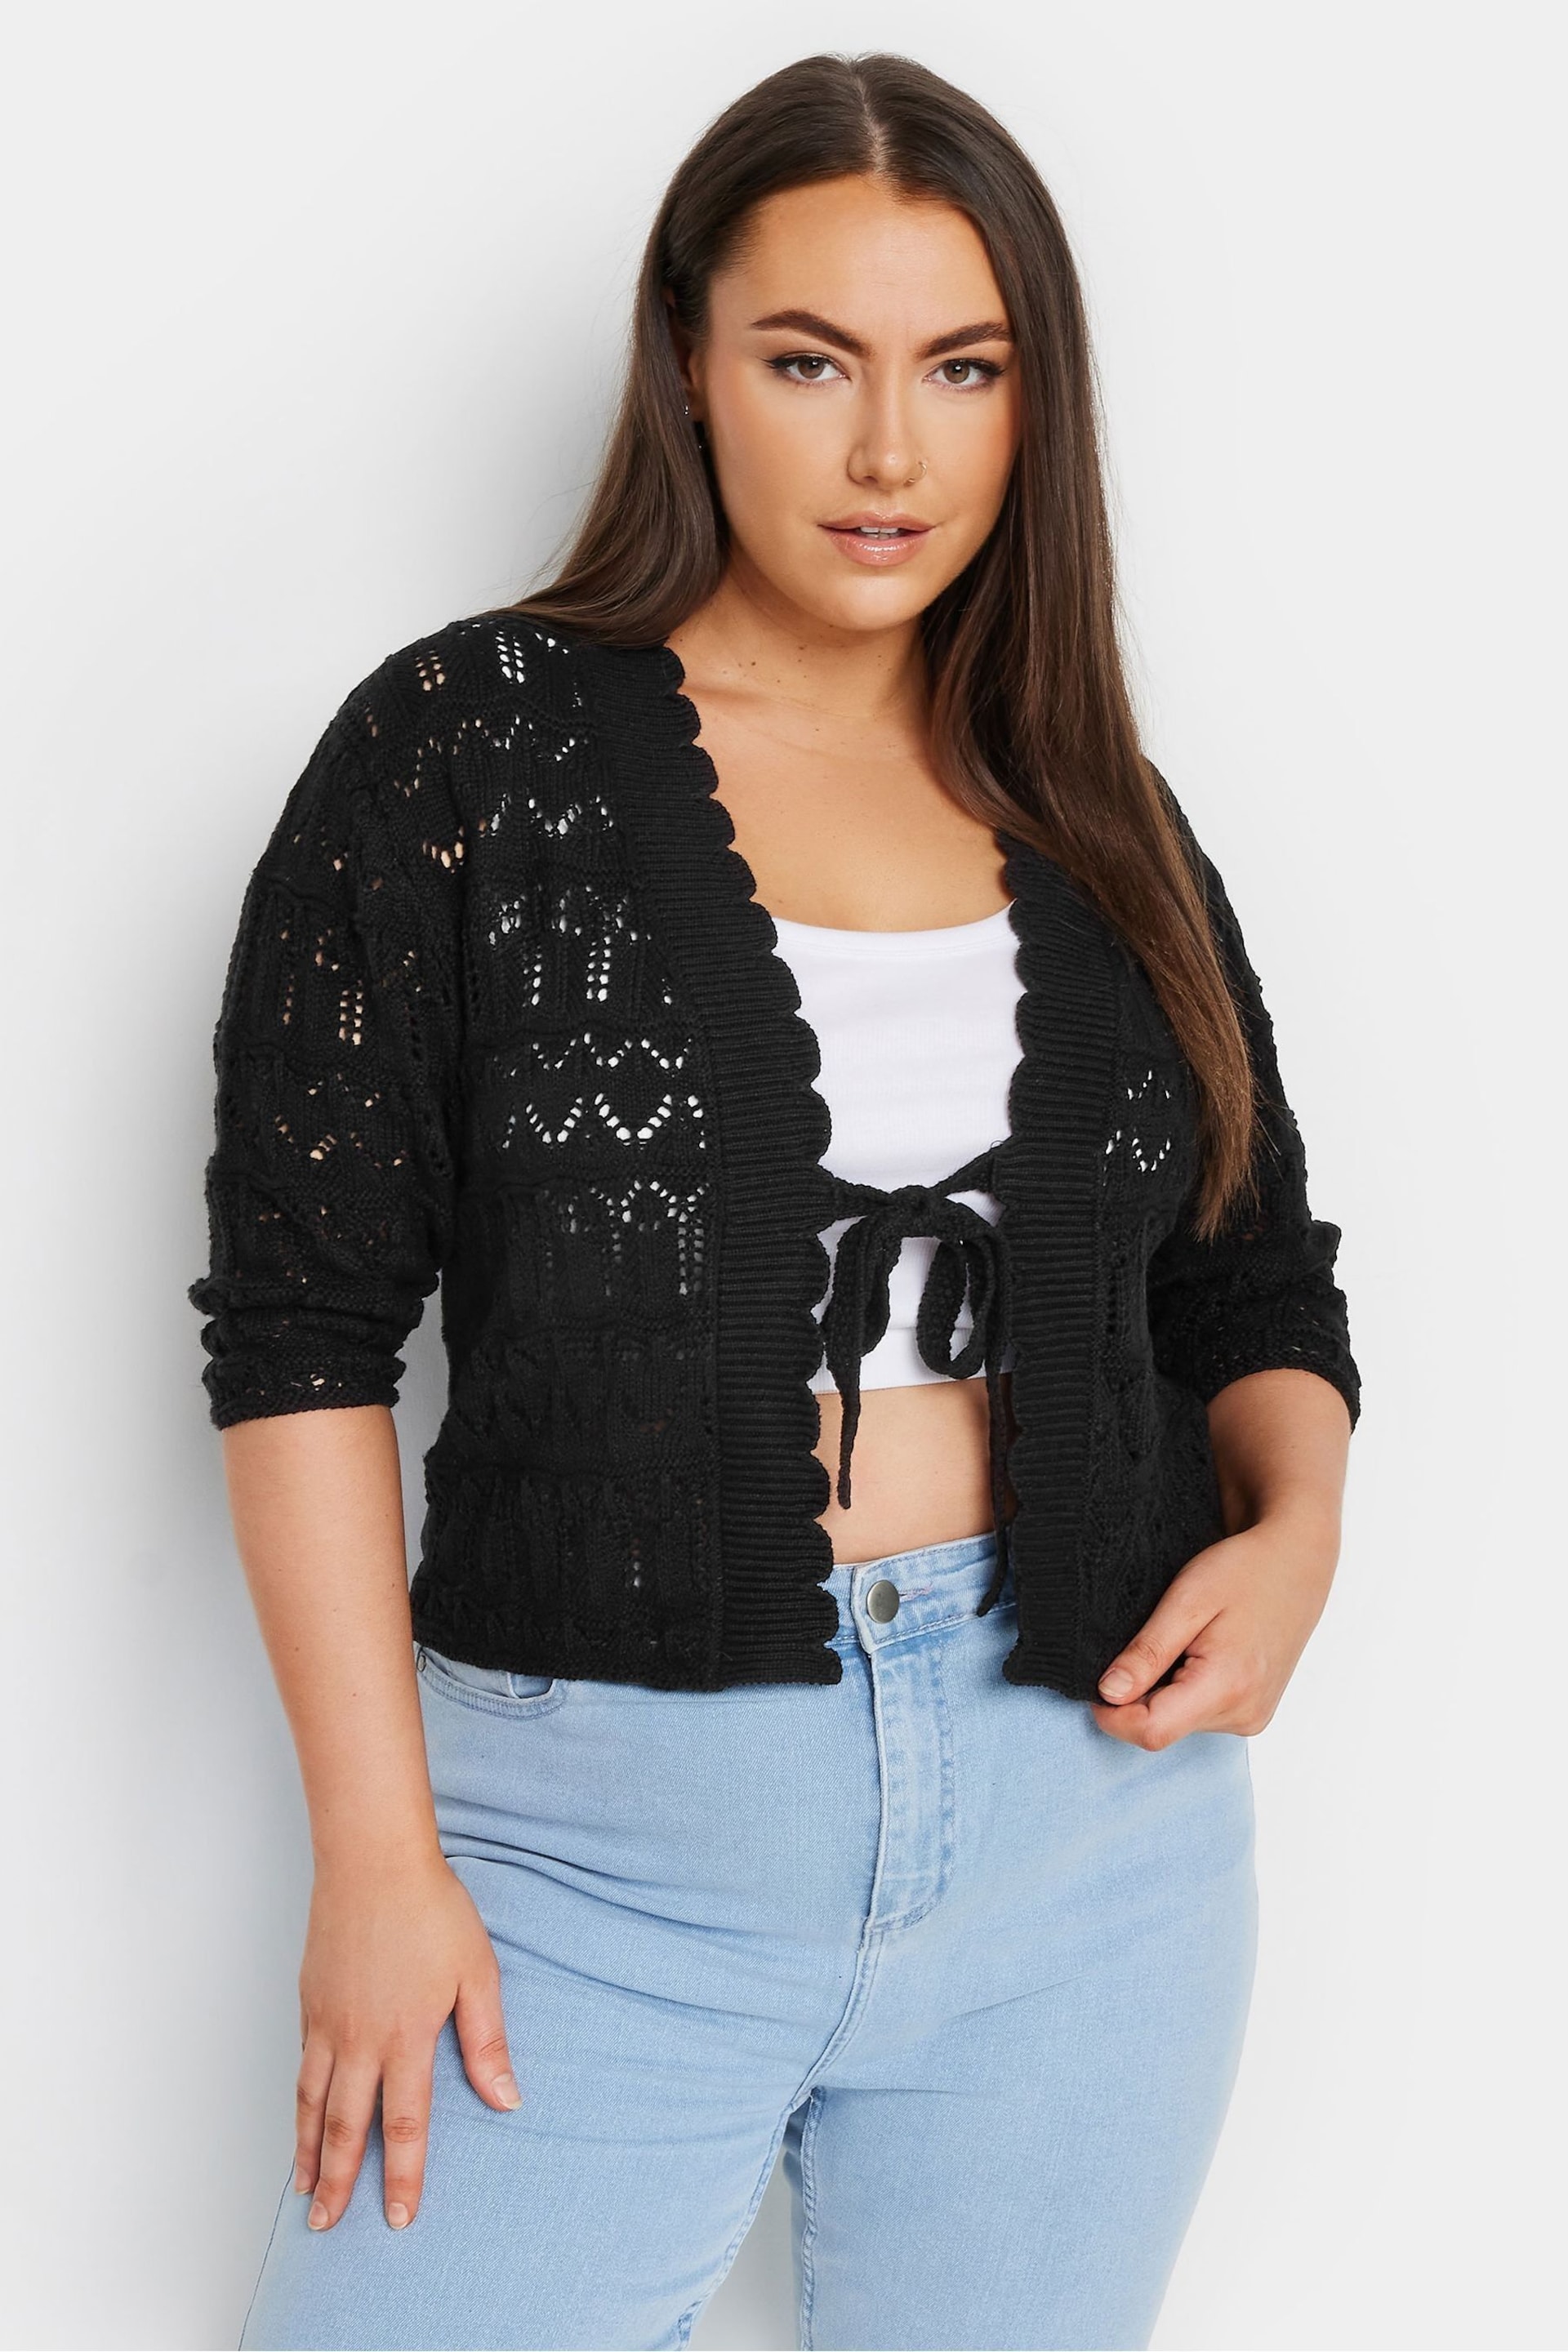 Yours Curve Black Crochet Tie Front Shrug - Image 1 of 5